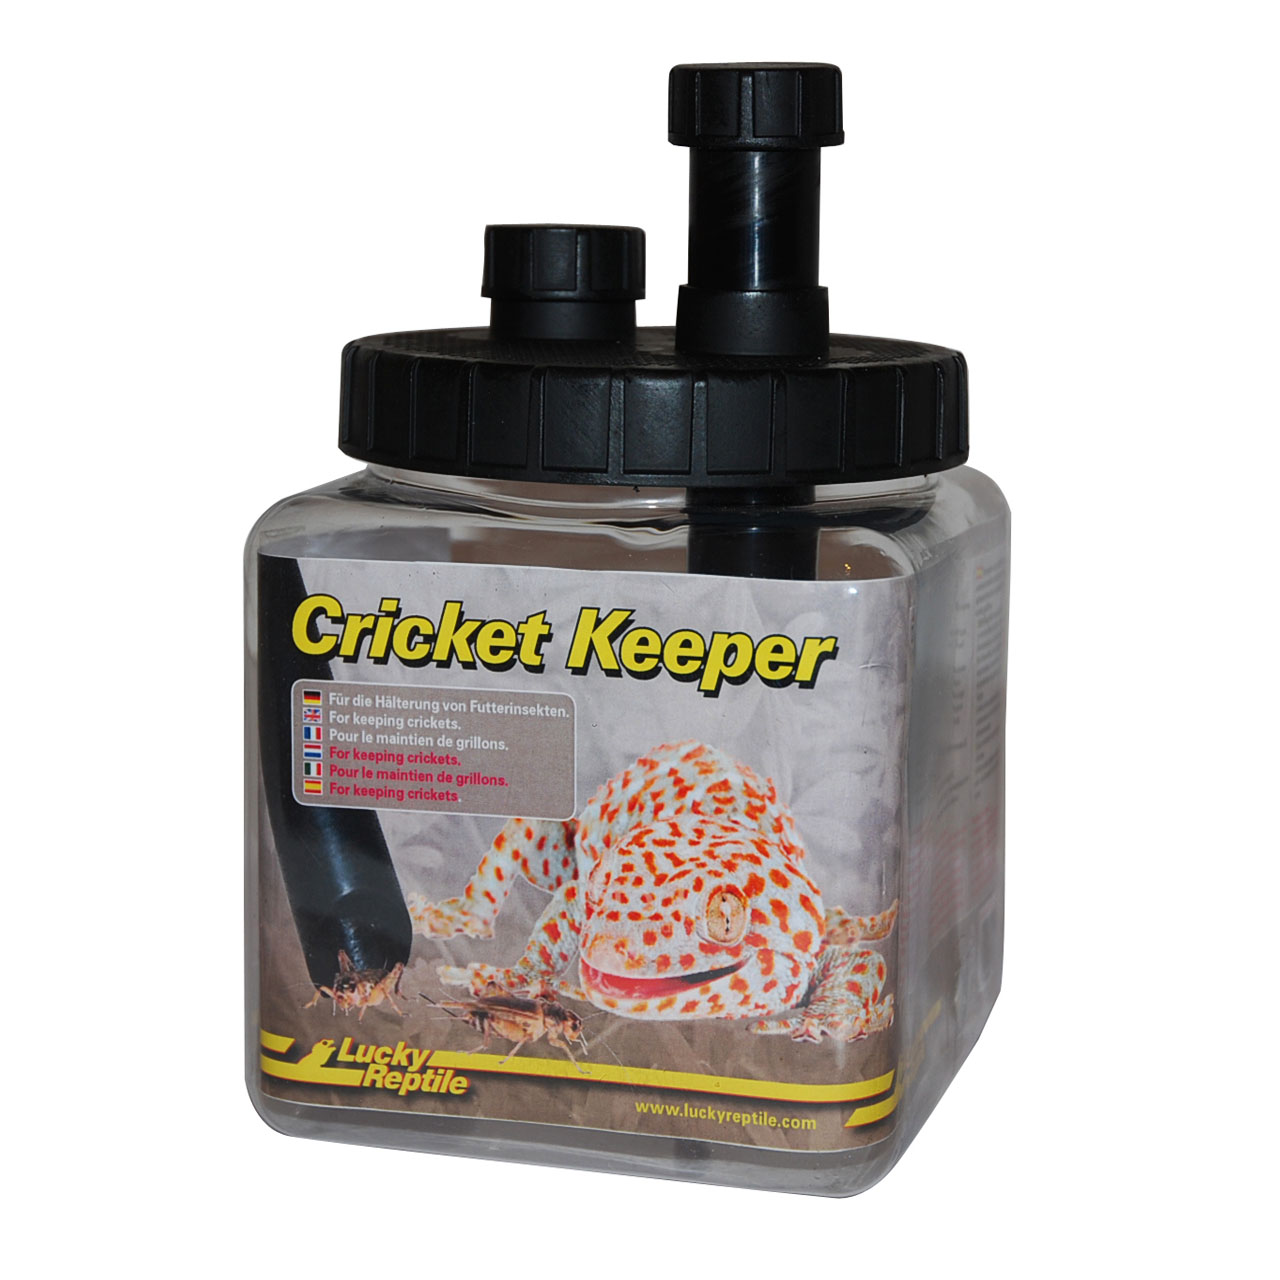 Cricket Keeper, Tools for Feeding and Drinking, Tools, Products